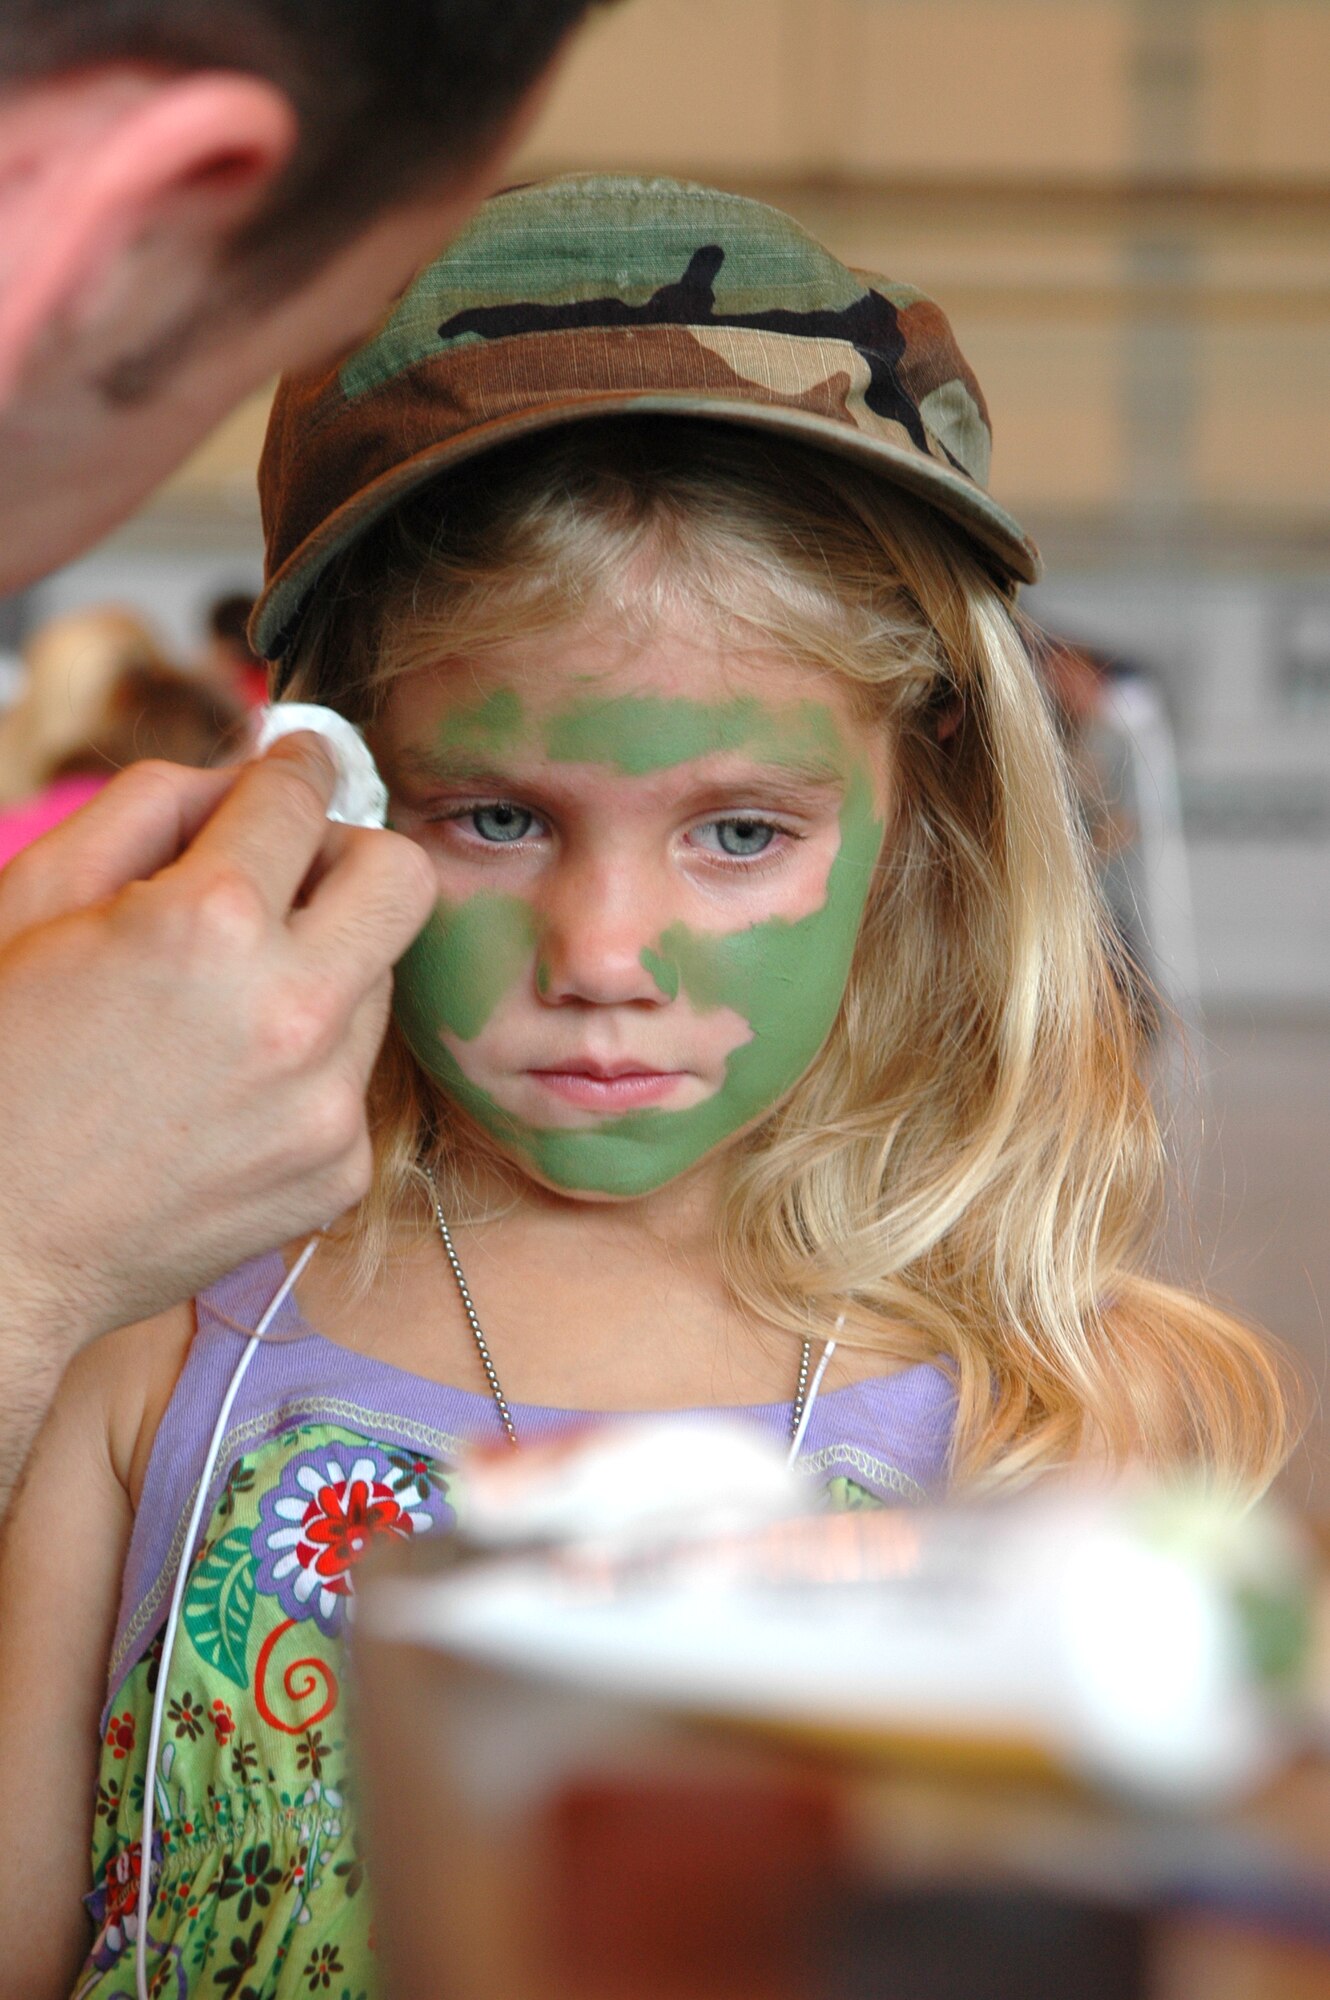 Hannah Breedlove, 5, waits nervously as the first color is applied at the comoflauge station at Camp Courage. Children learned about the deployment process there were two static aircraft-displays, along with vehicles and personnel from Security Forces, the Army and Marine Corps. (Air Force photo/Micah Garbarino)